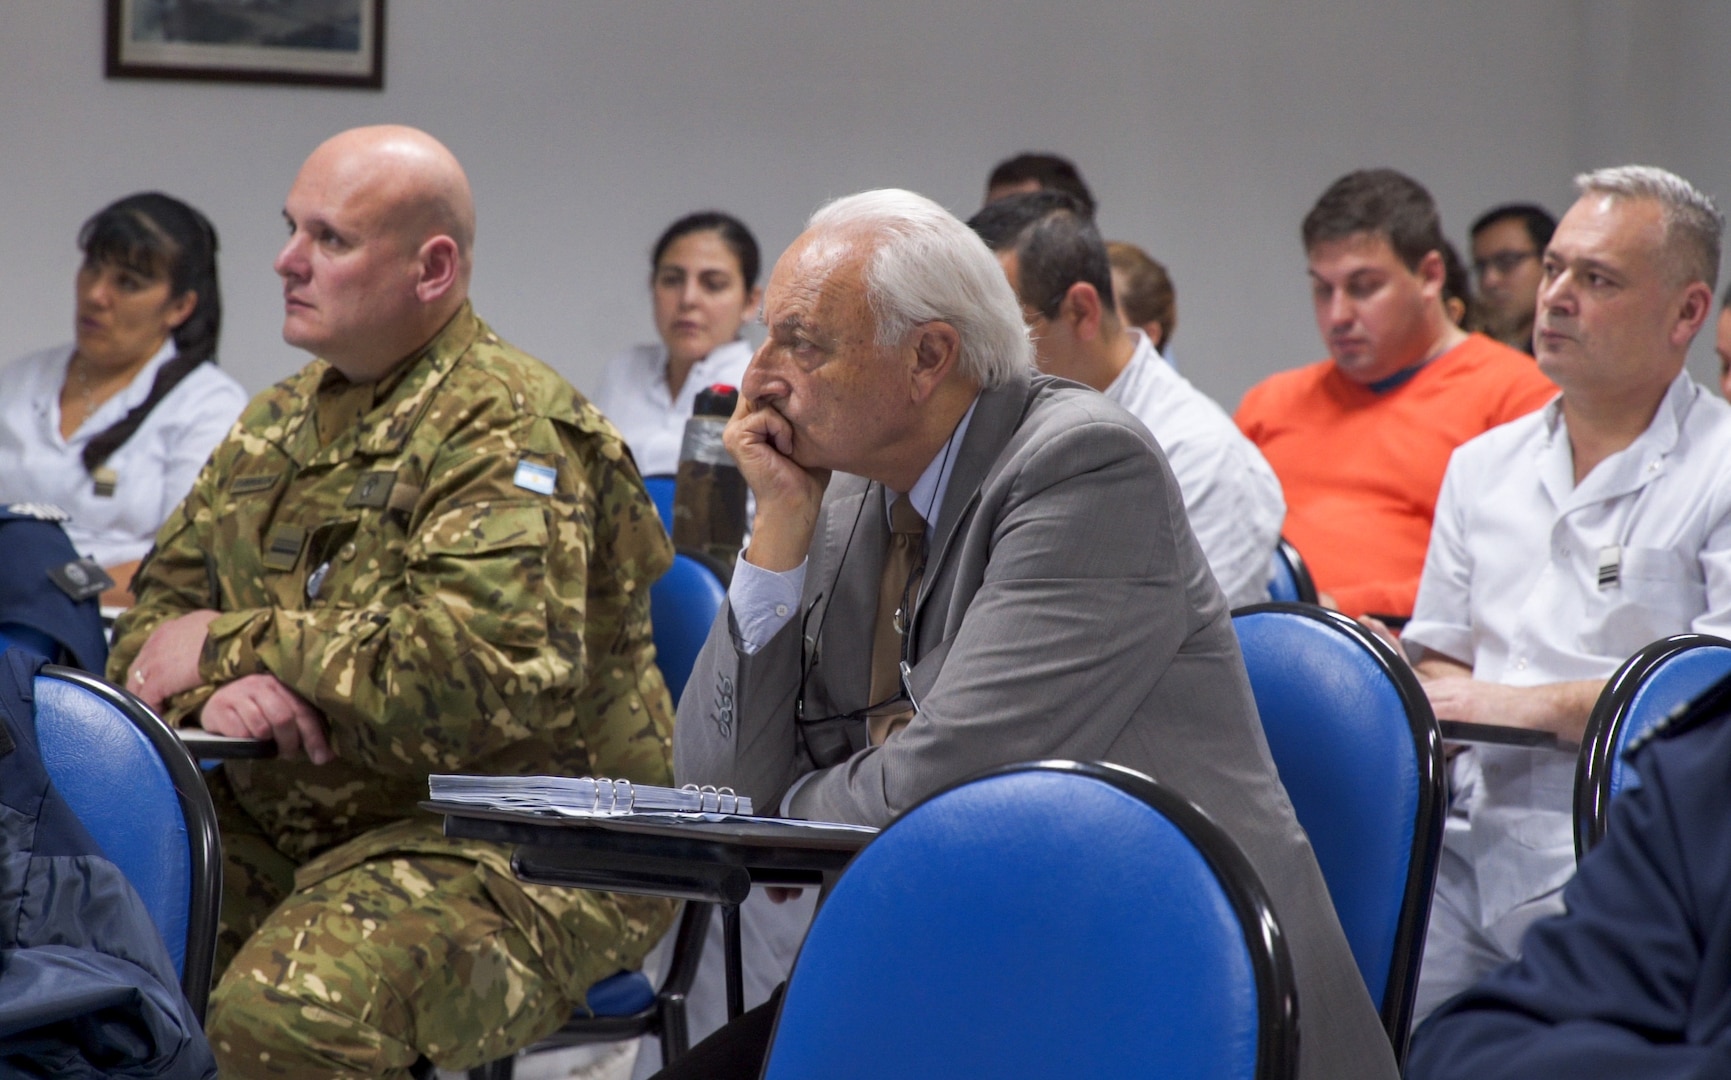 Members of the Argentinian air force medical service attend a breifing during a senior leader engagement as part of the Department of Defense State Partnership Program Sep. 20 at the National Institute of Aeronautical and Space Medicine, Argentina.